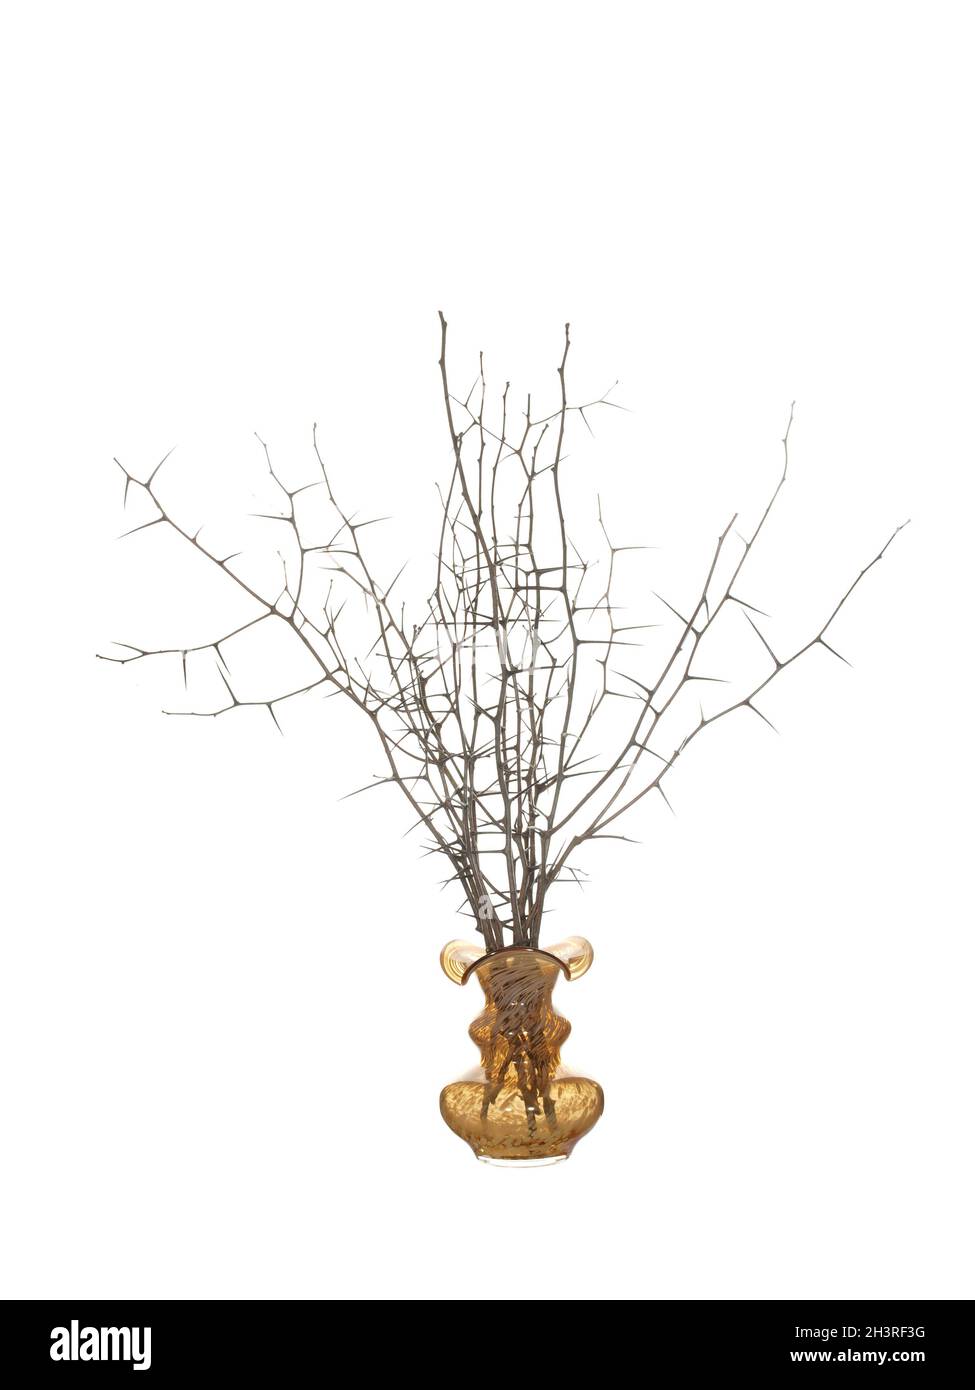 Dry twigs of blackthorn with long needles and without leaves in a yellow glass vase isolated on a white background. Stock Photo